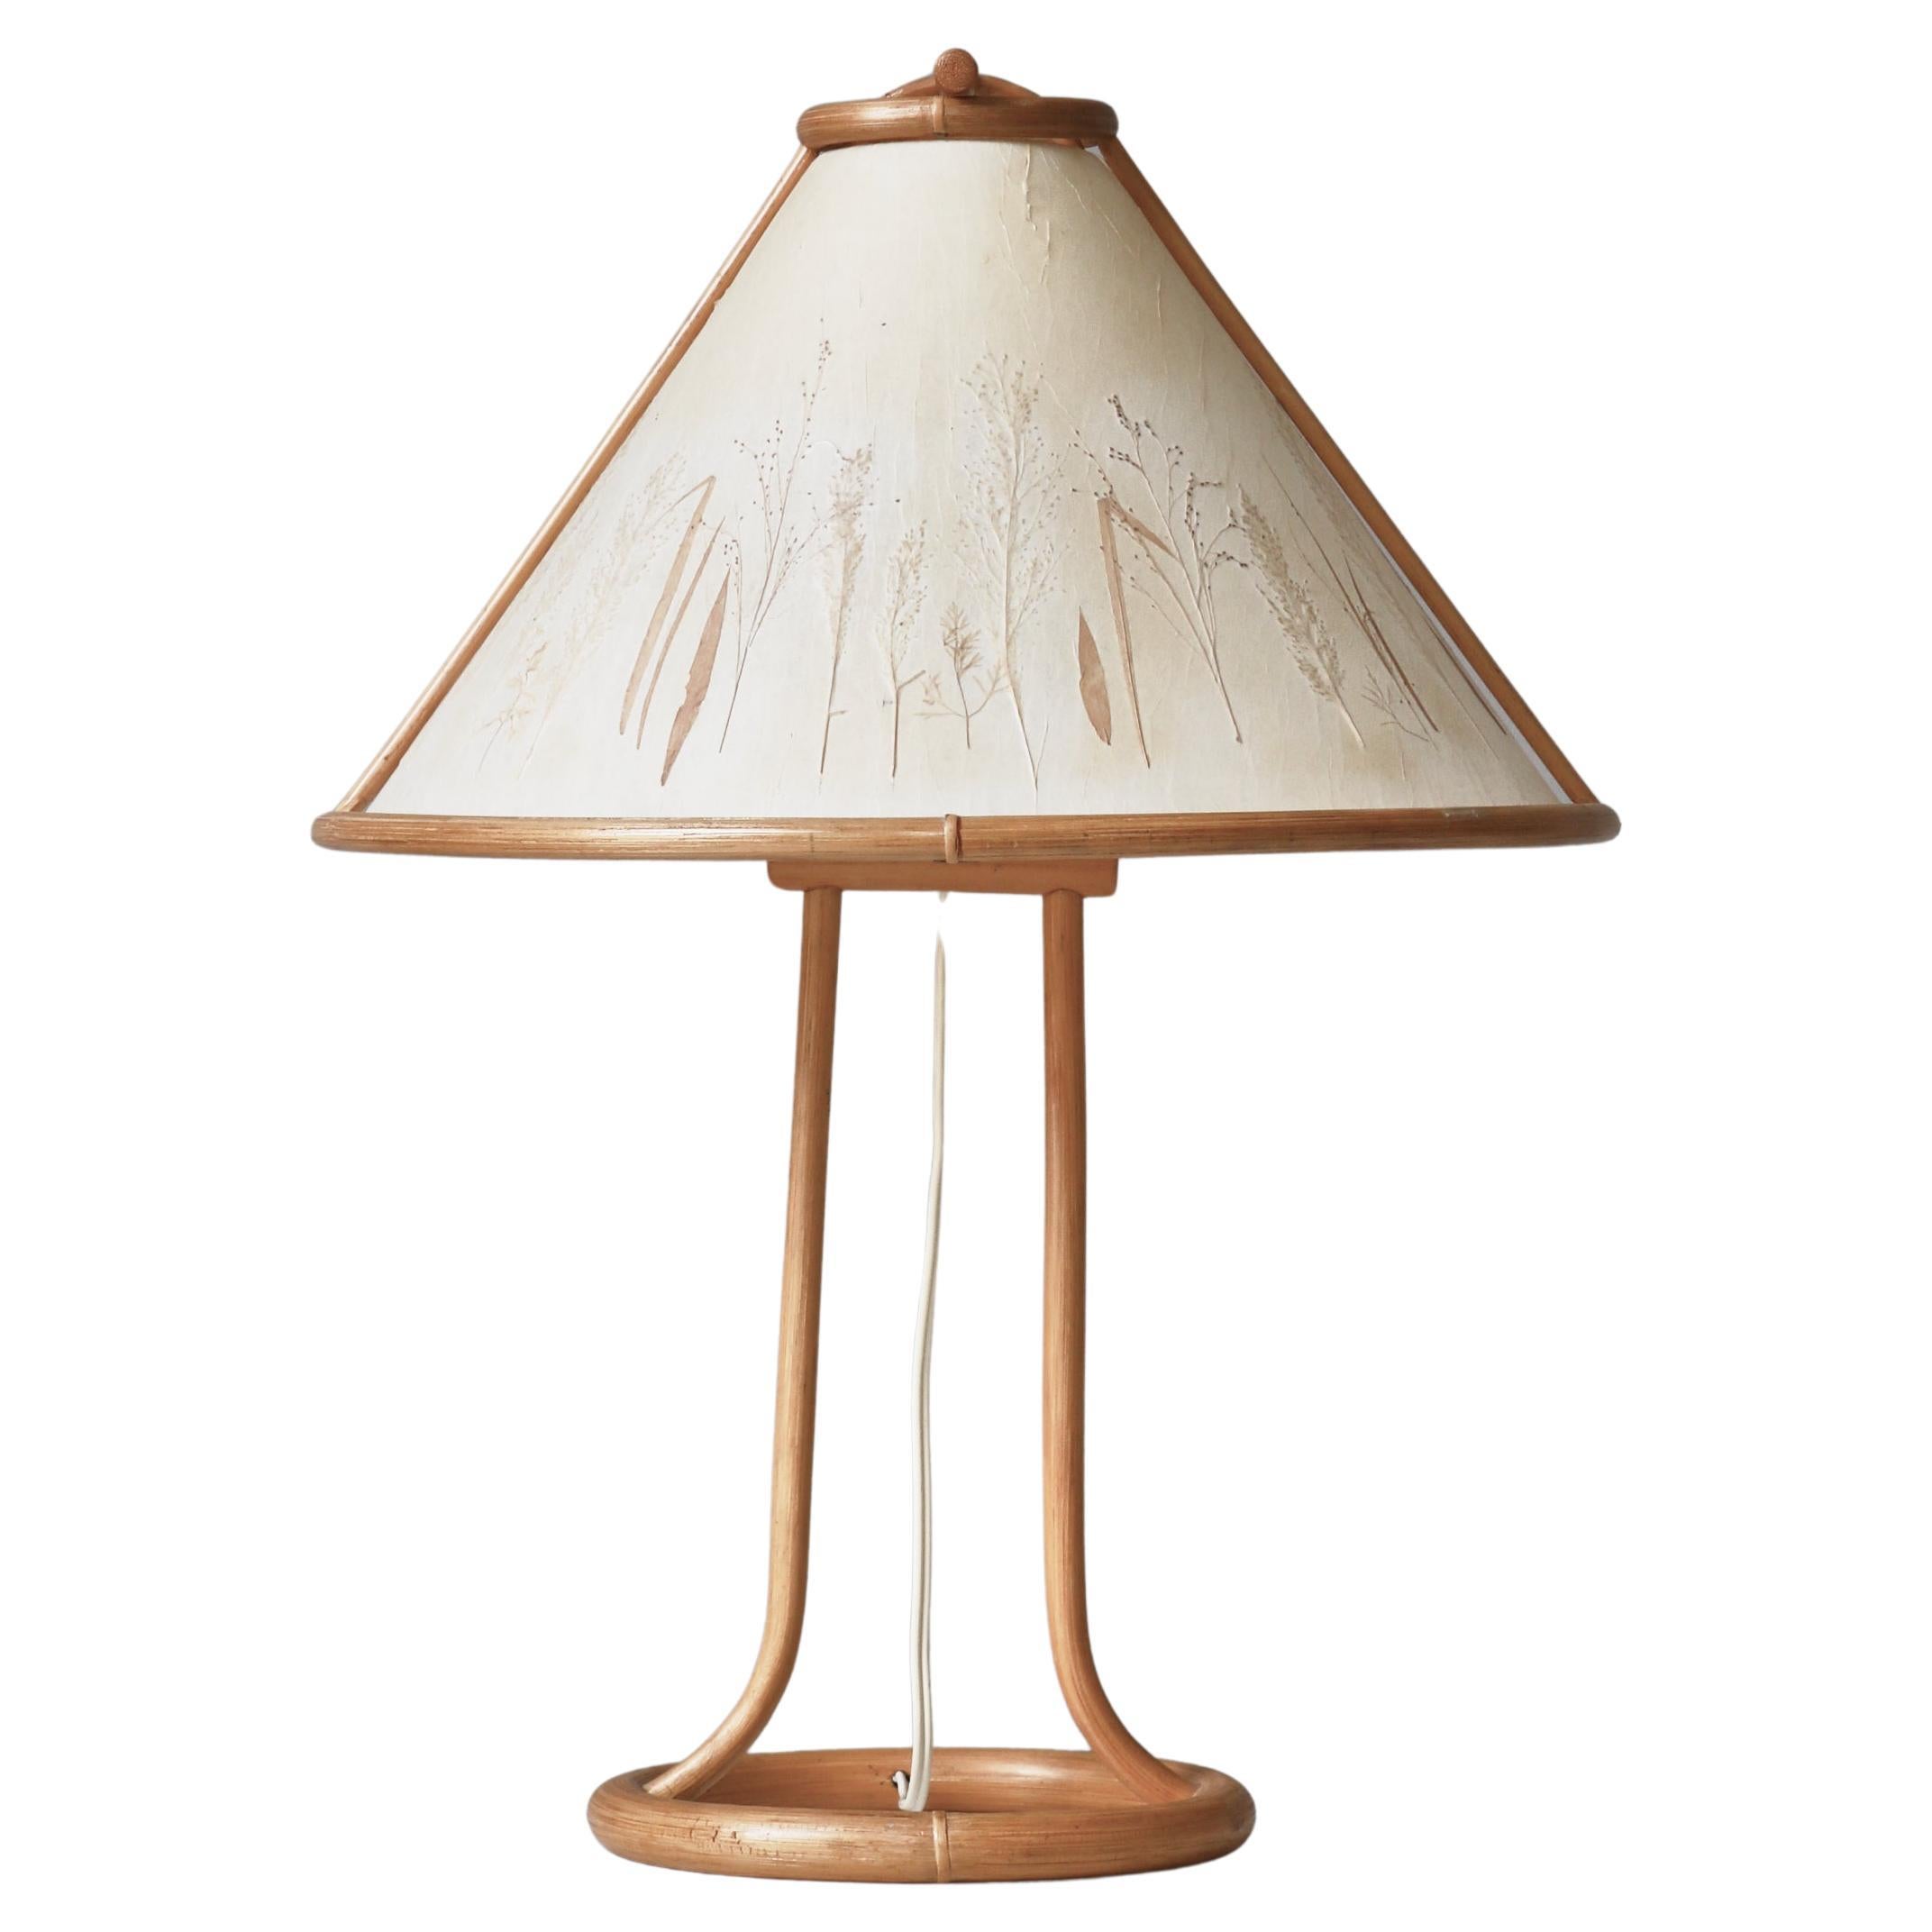 Scandinavian Wabi-Sabi Bamboo Table Lamp Shade with Pressed Plants, 1950s For Sale